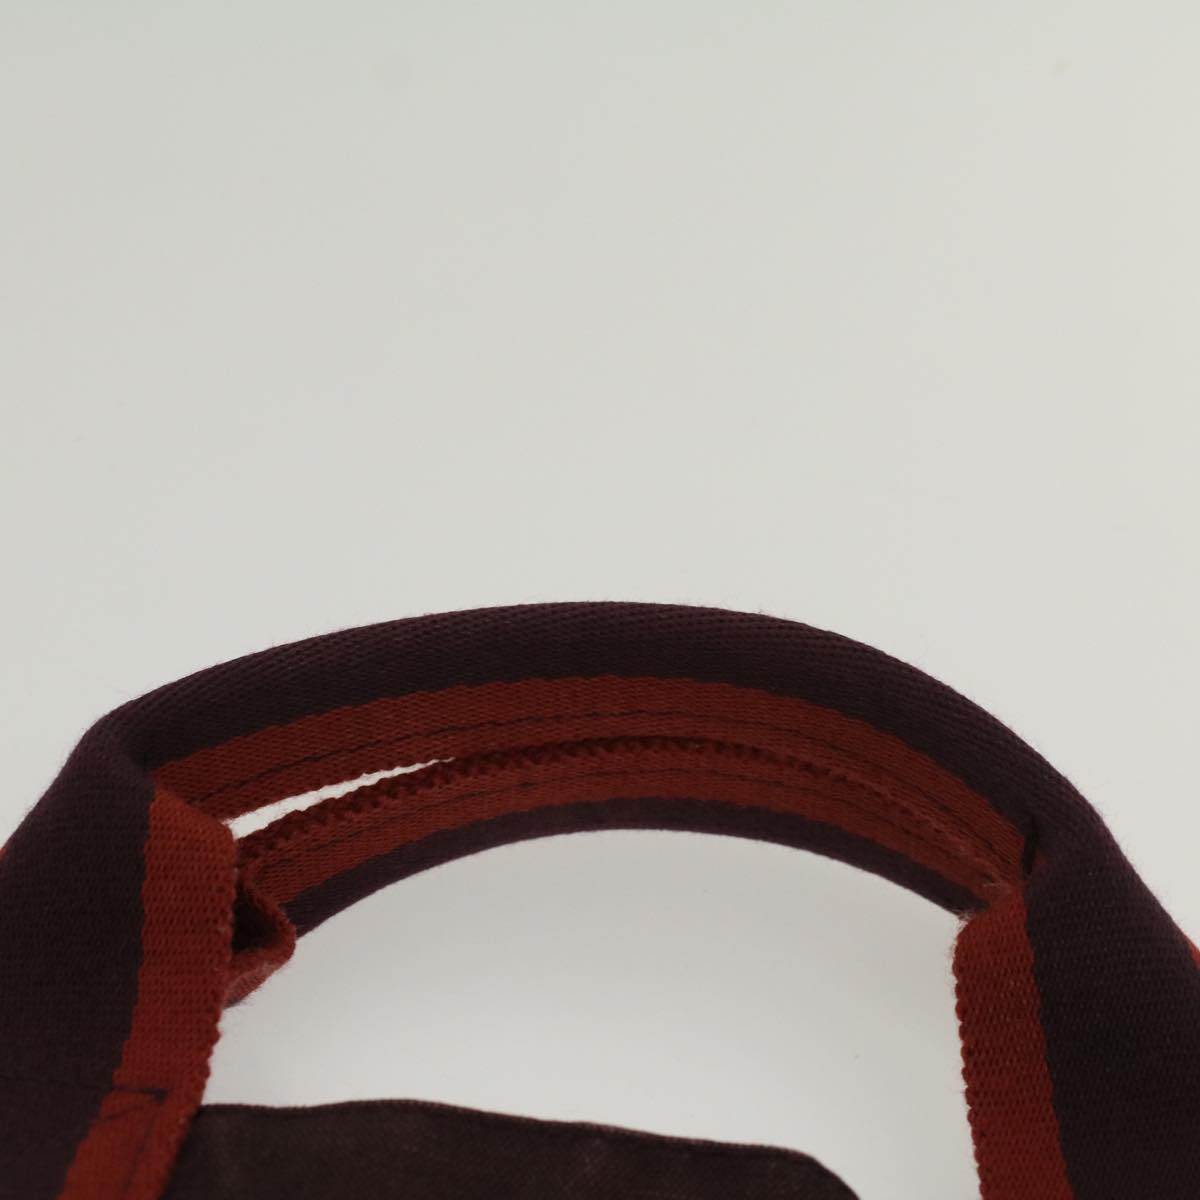 HERMES Fourre ToutMM Hand Bag Canvas Wine Red Auth 54140